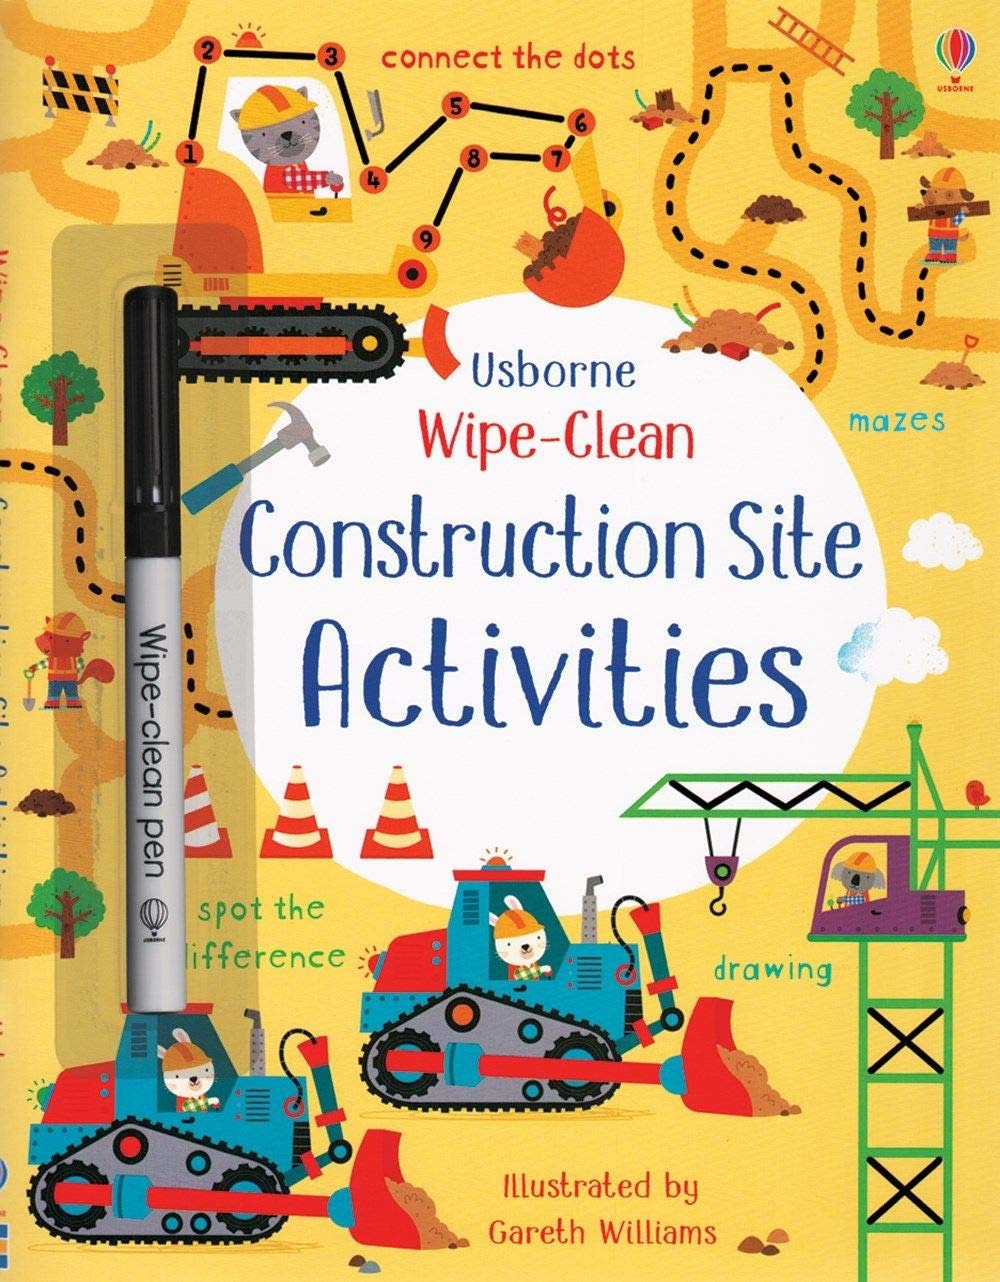 Wipe-Clean Construction Site Activities by Usborne